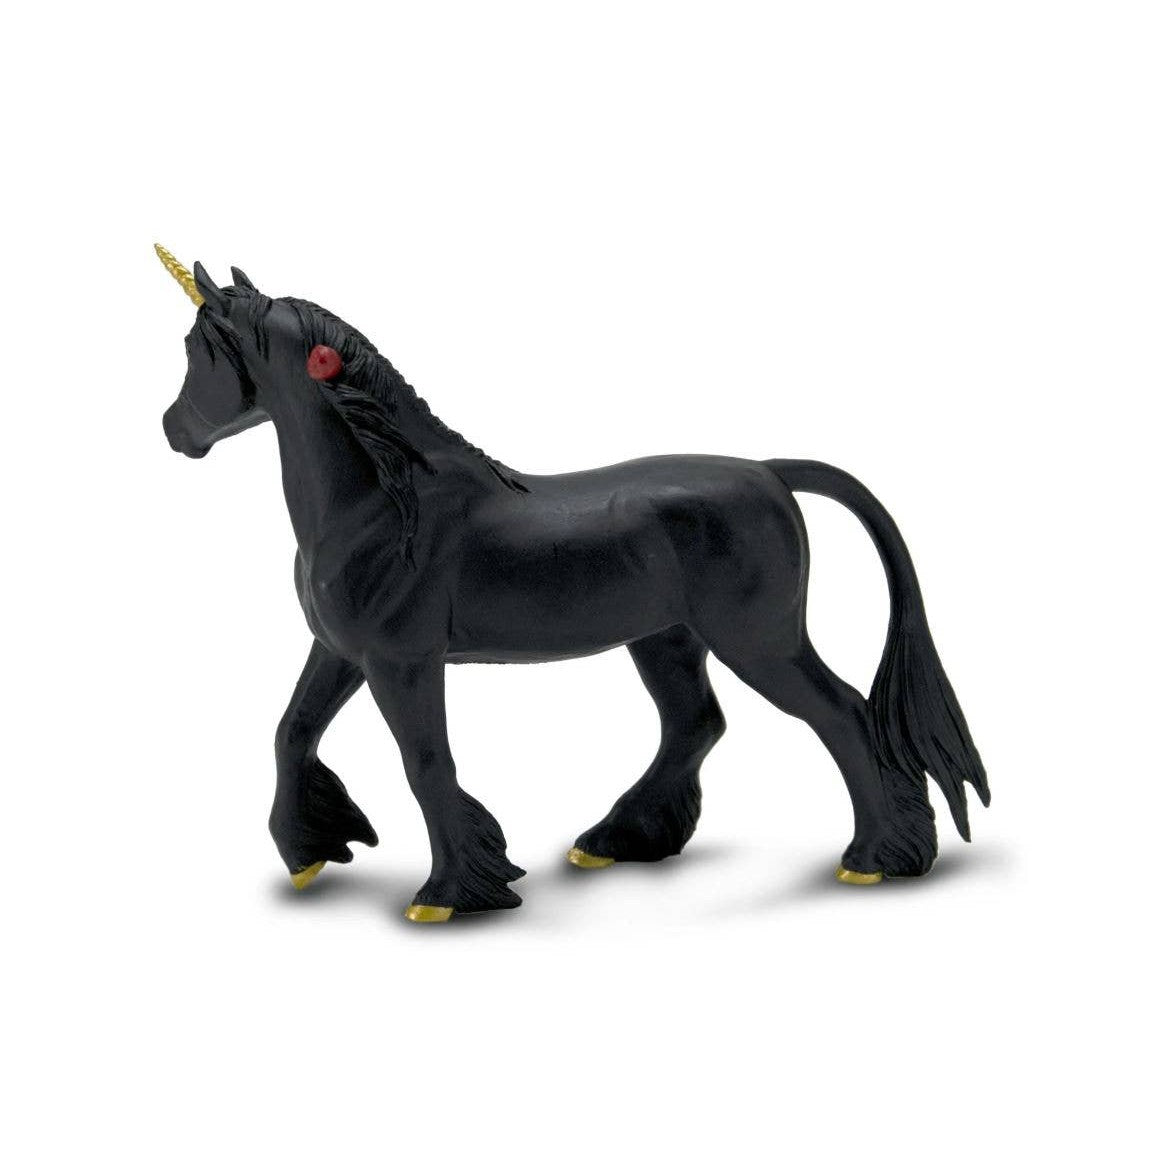 Side view of the Twilight Unicorn.